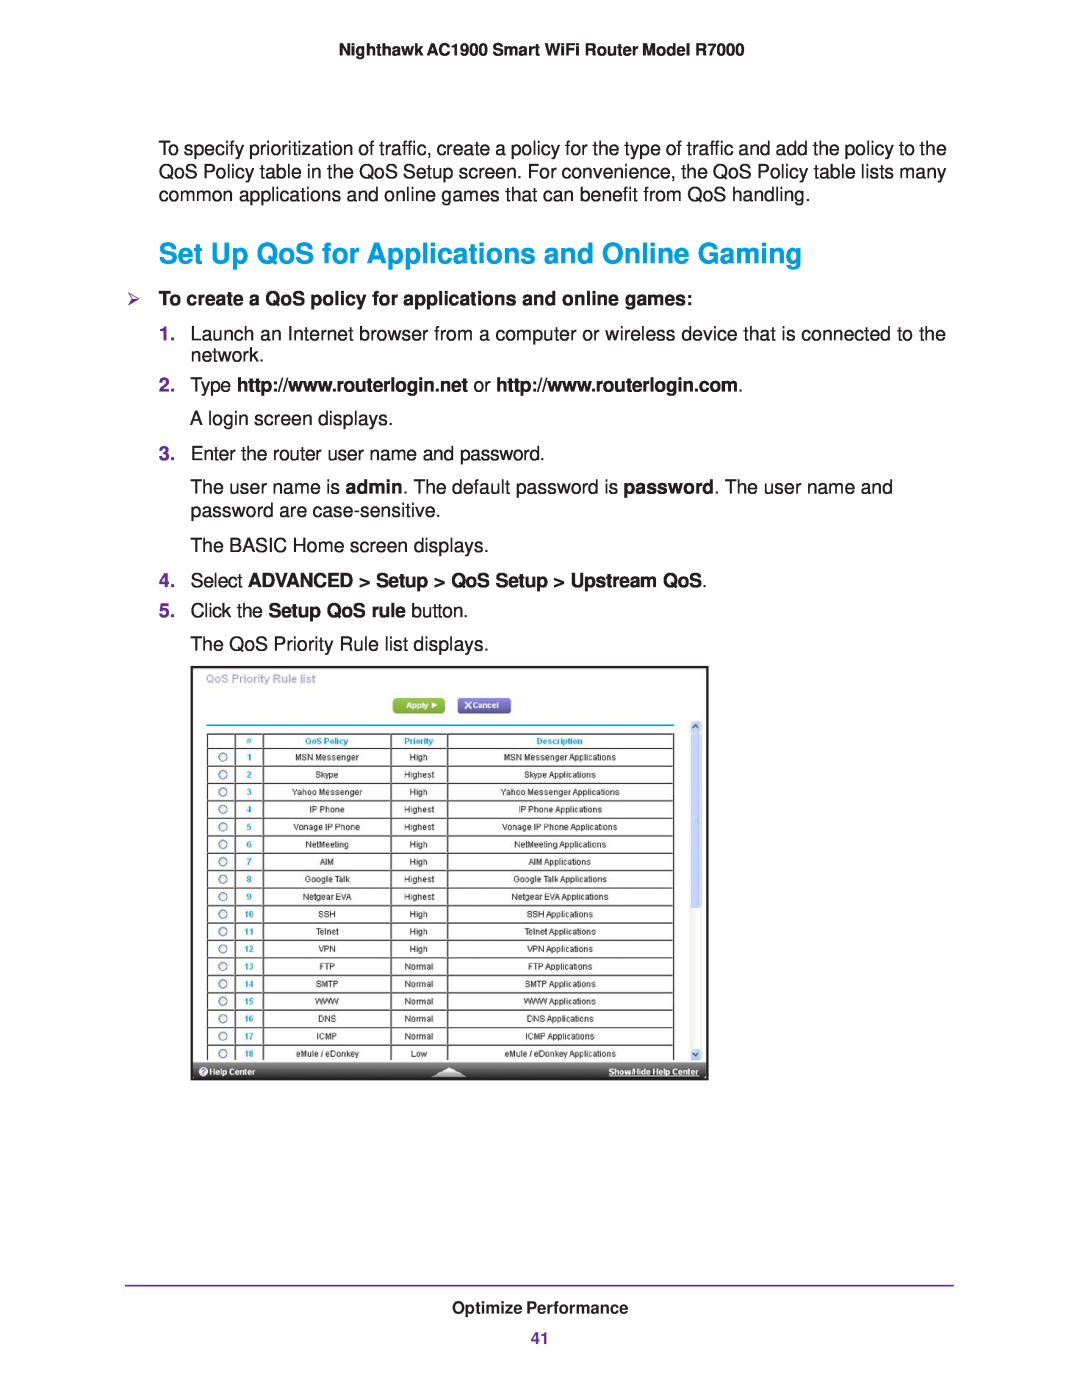 NETGEAR R7000 Set Up QoS for Applications and Online Gaming,  To create a QoS policy for applications and online games 